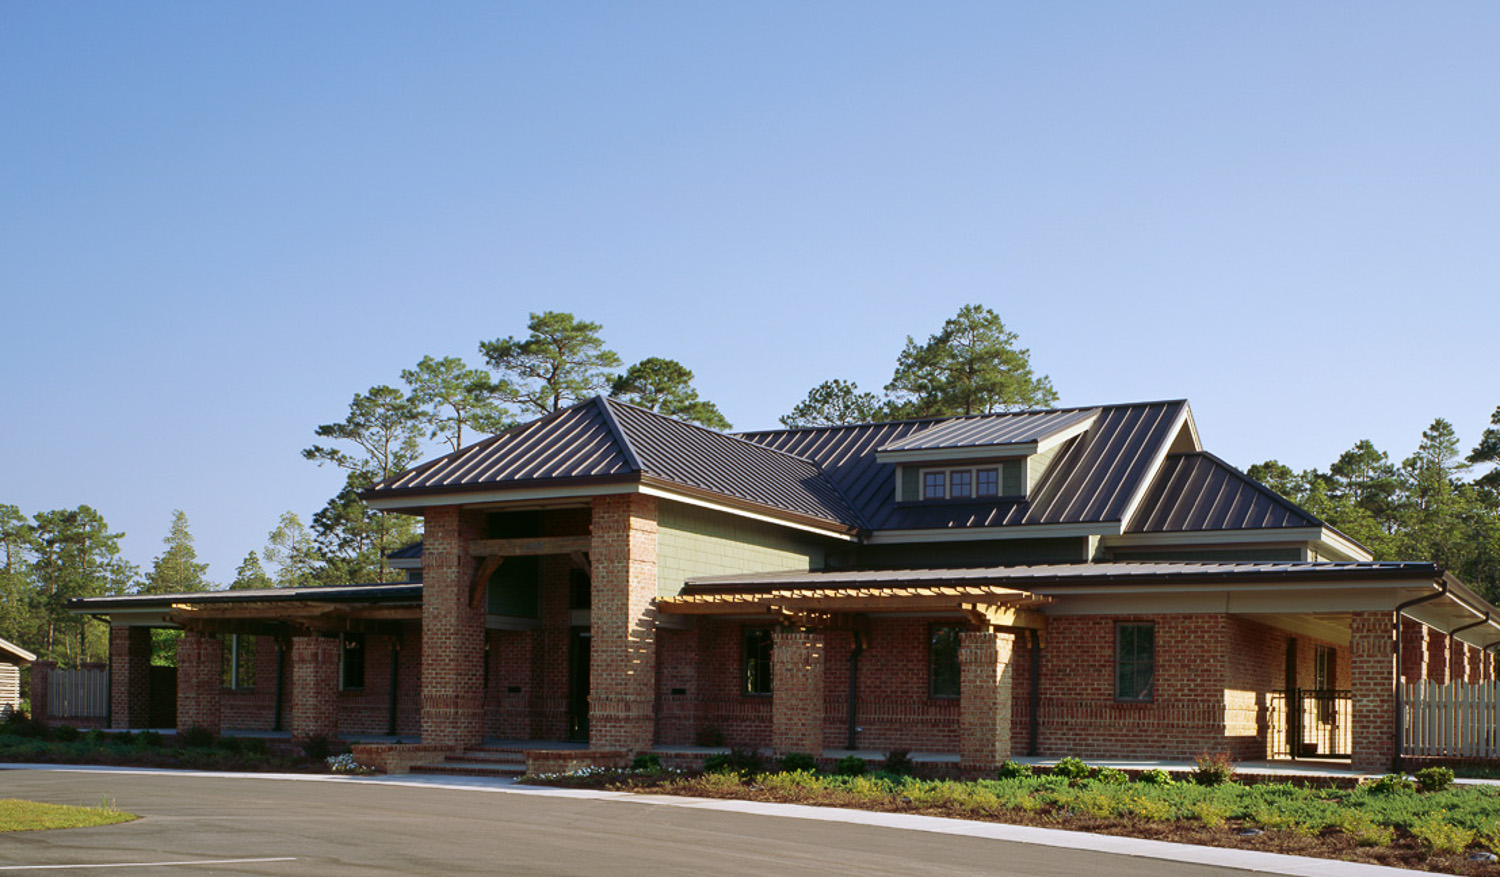  Rourk Woods Community Center  Shallotte, NC  Completed as Project Architect for John Sawyer Architects 